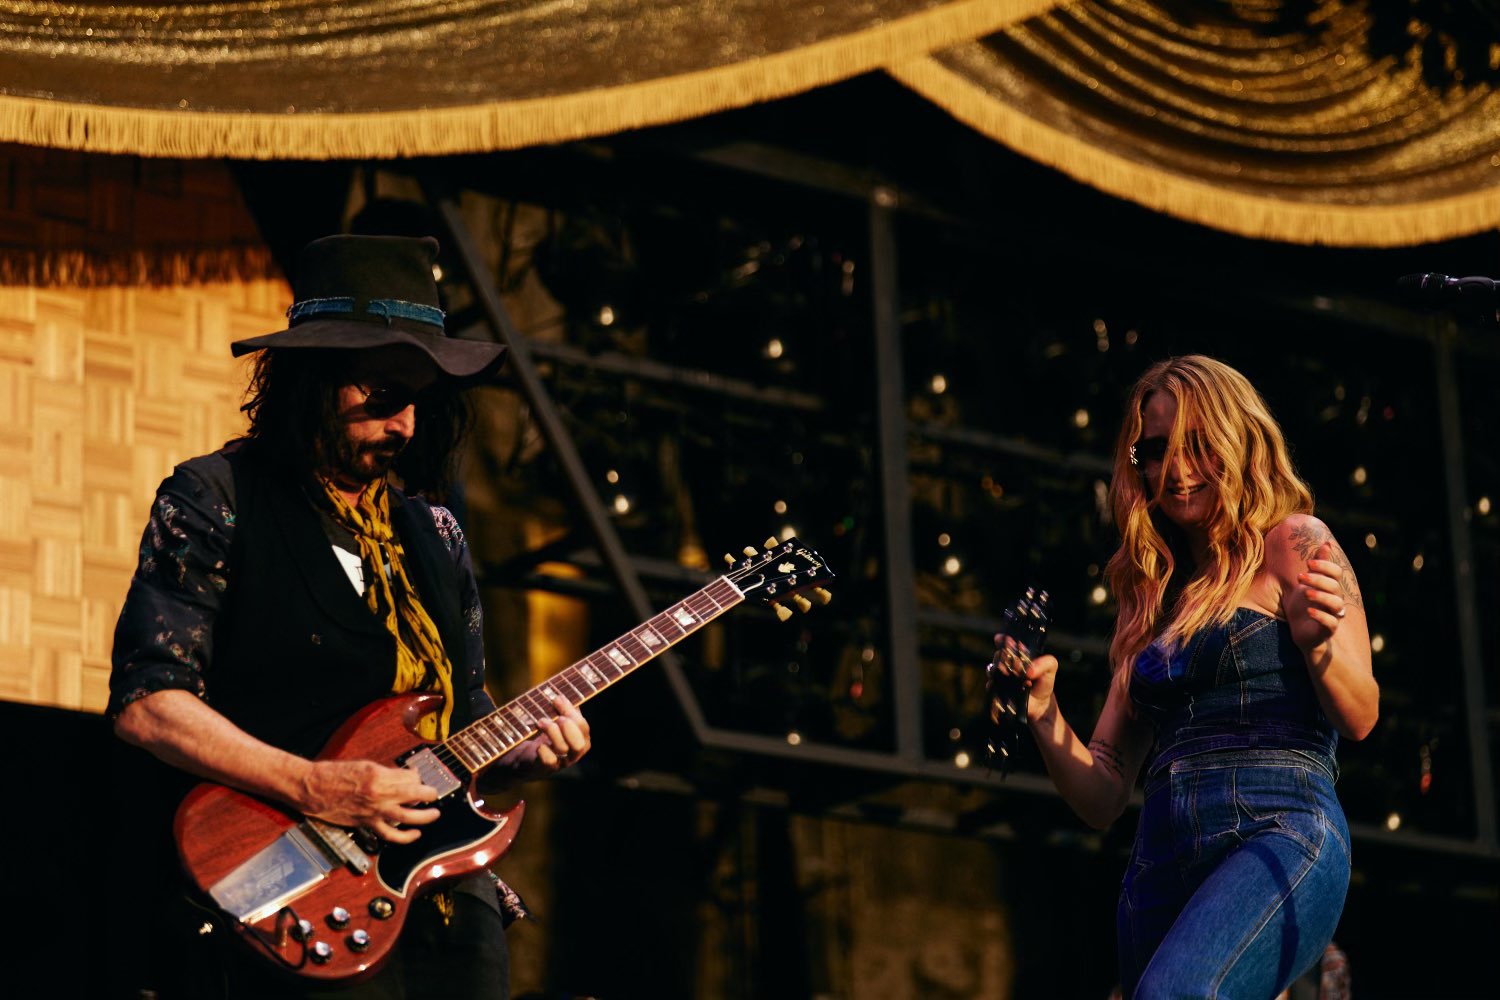 Plaat van de week: Mike Campbell & The Dirty Knobs – State of Mind (feat. Margo Price)